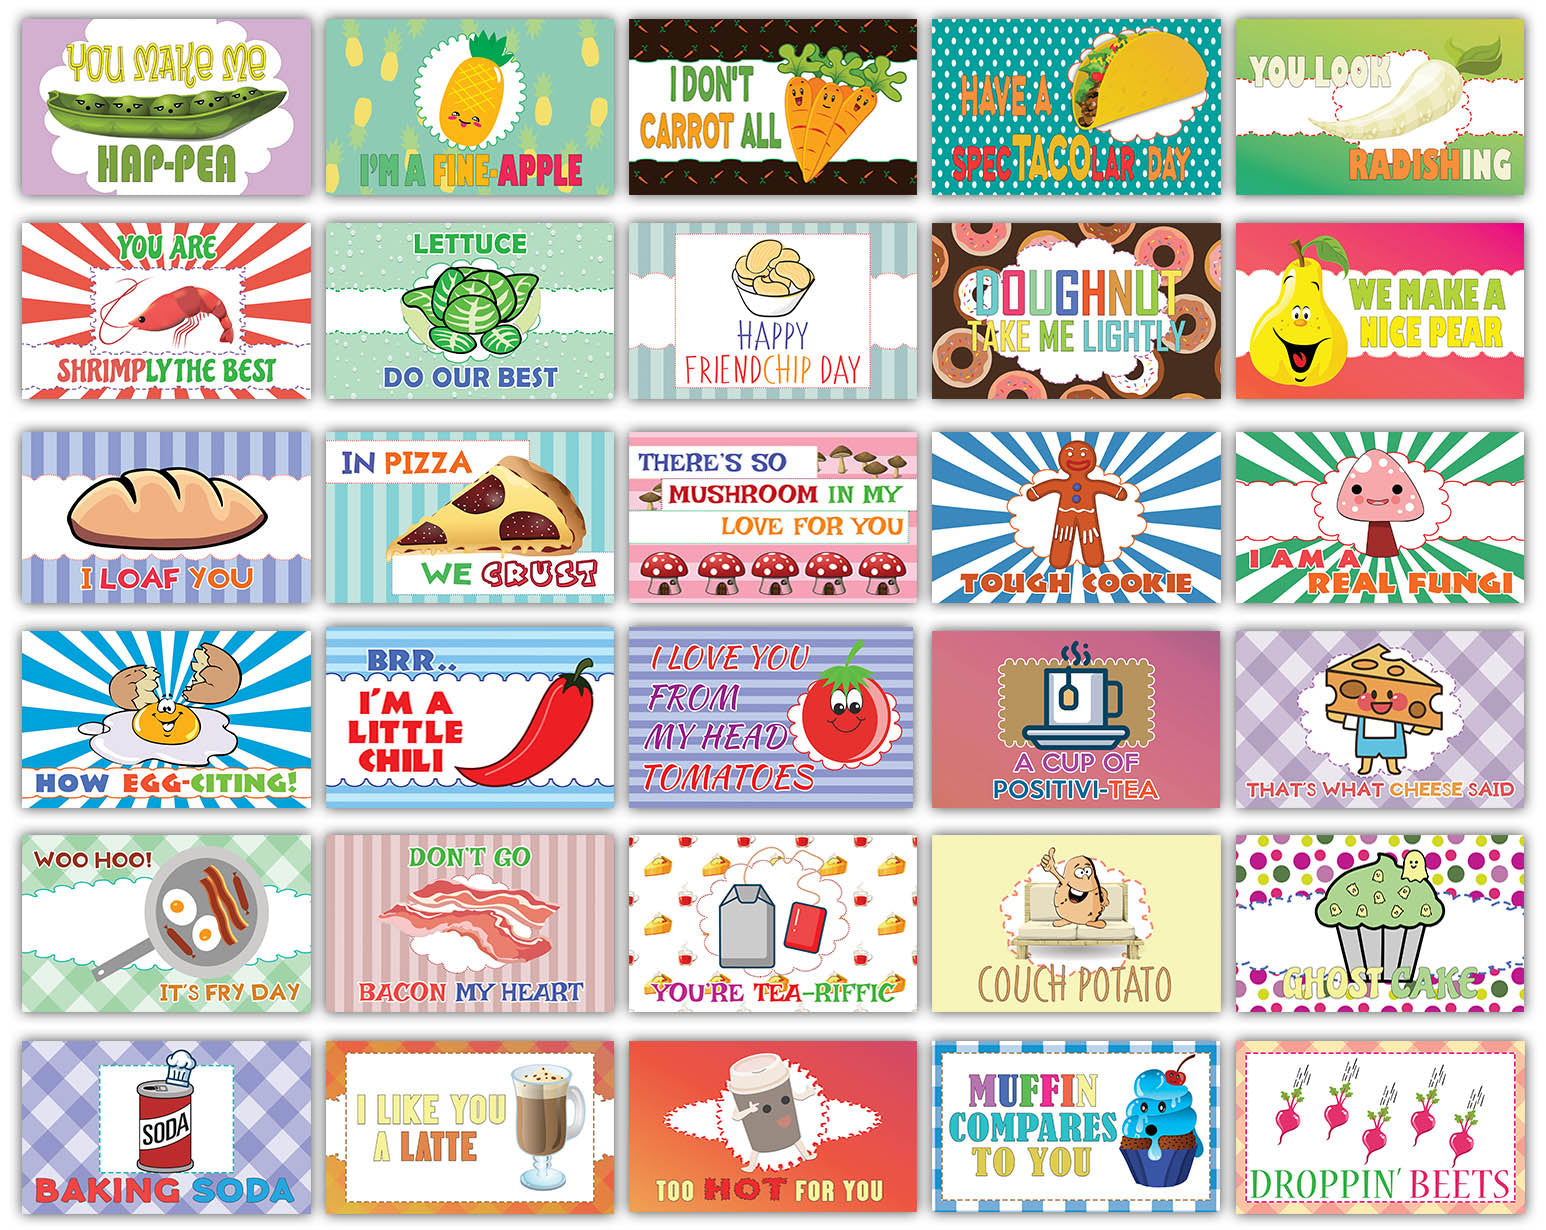 Creanoso Funny Food Puns Lunchbox Notecards - Flashcards for Kids